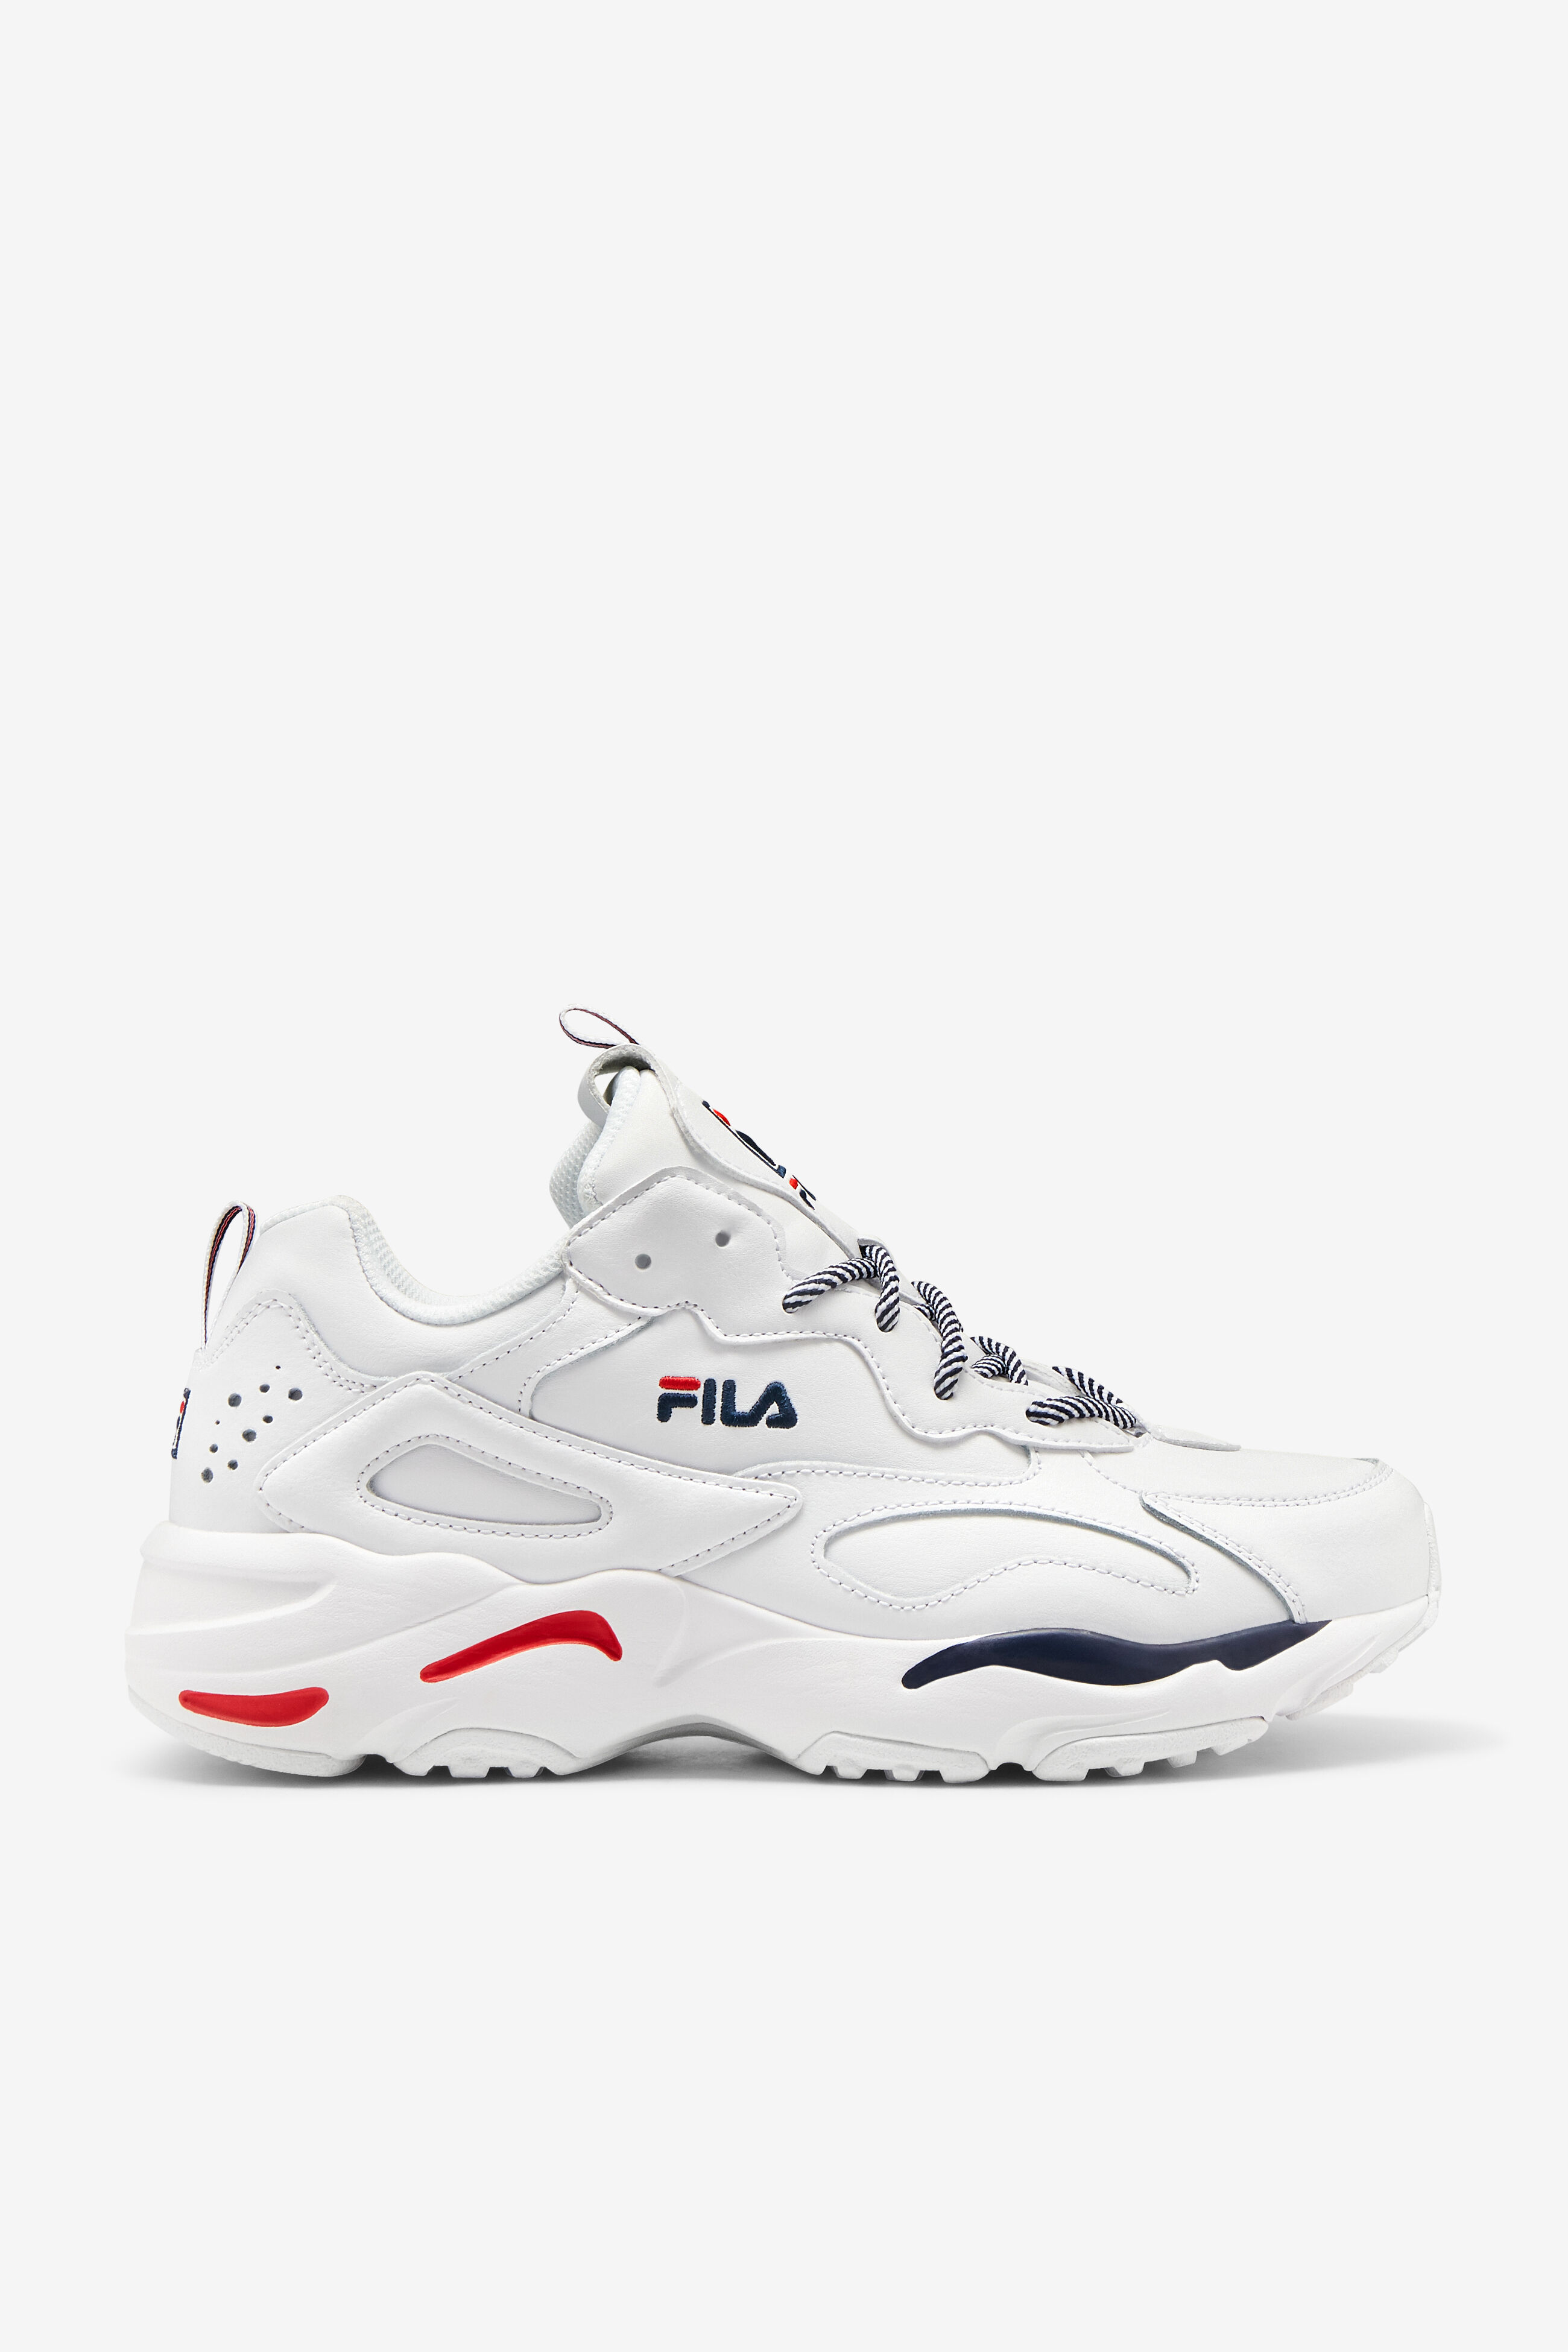 Fila Ray Tracer Off White Hotsell | www.medialit.org